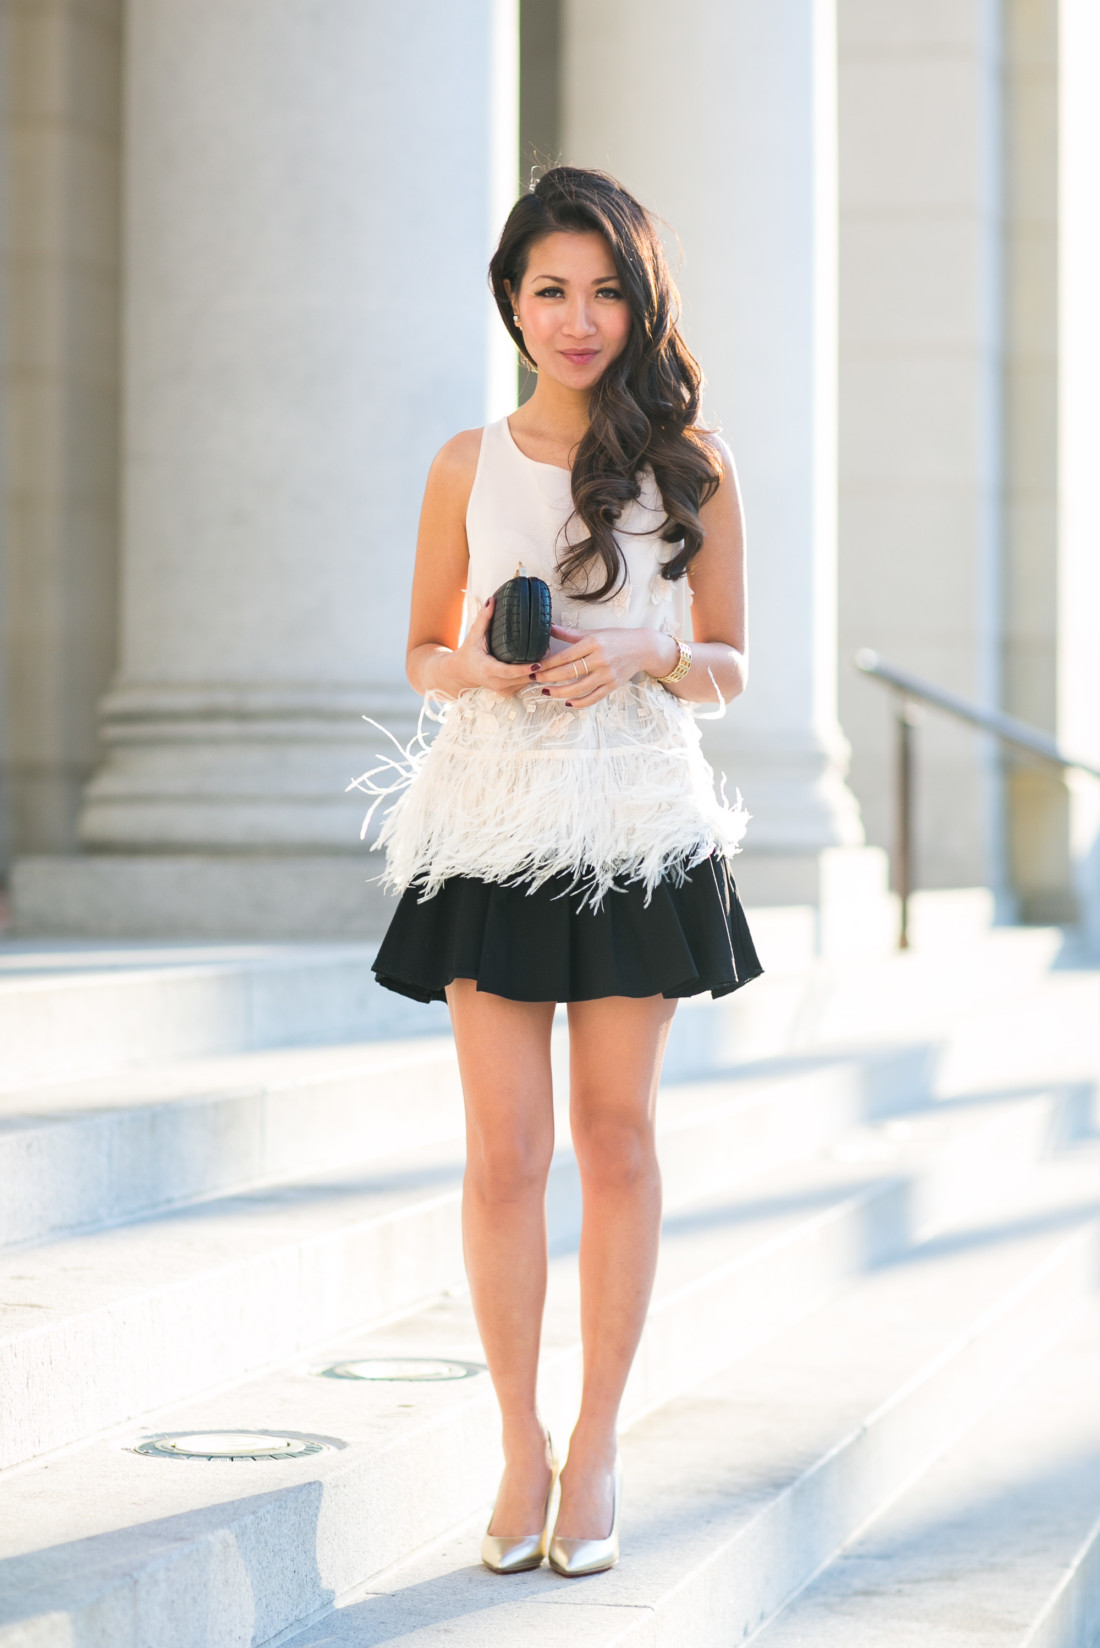 New Year's Eve Outfit- The Feathered Skirt